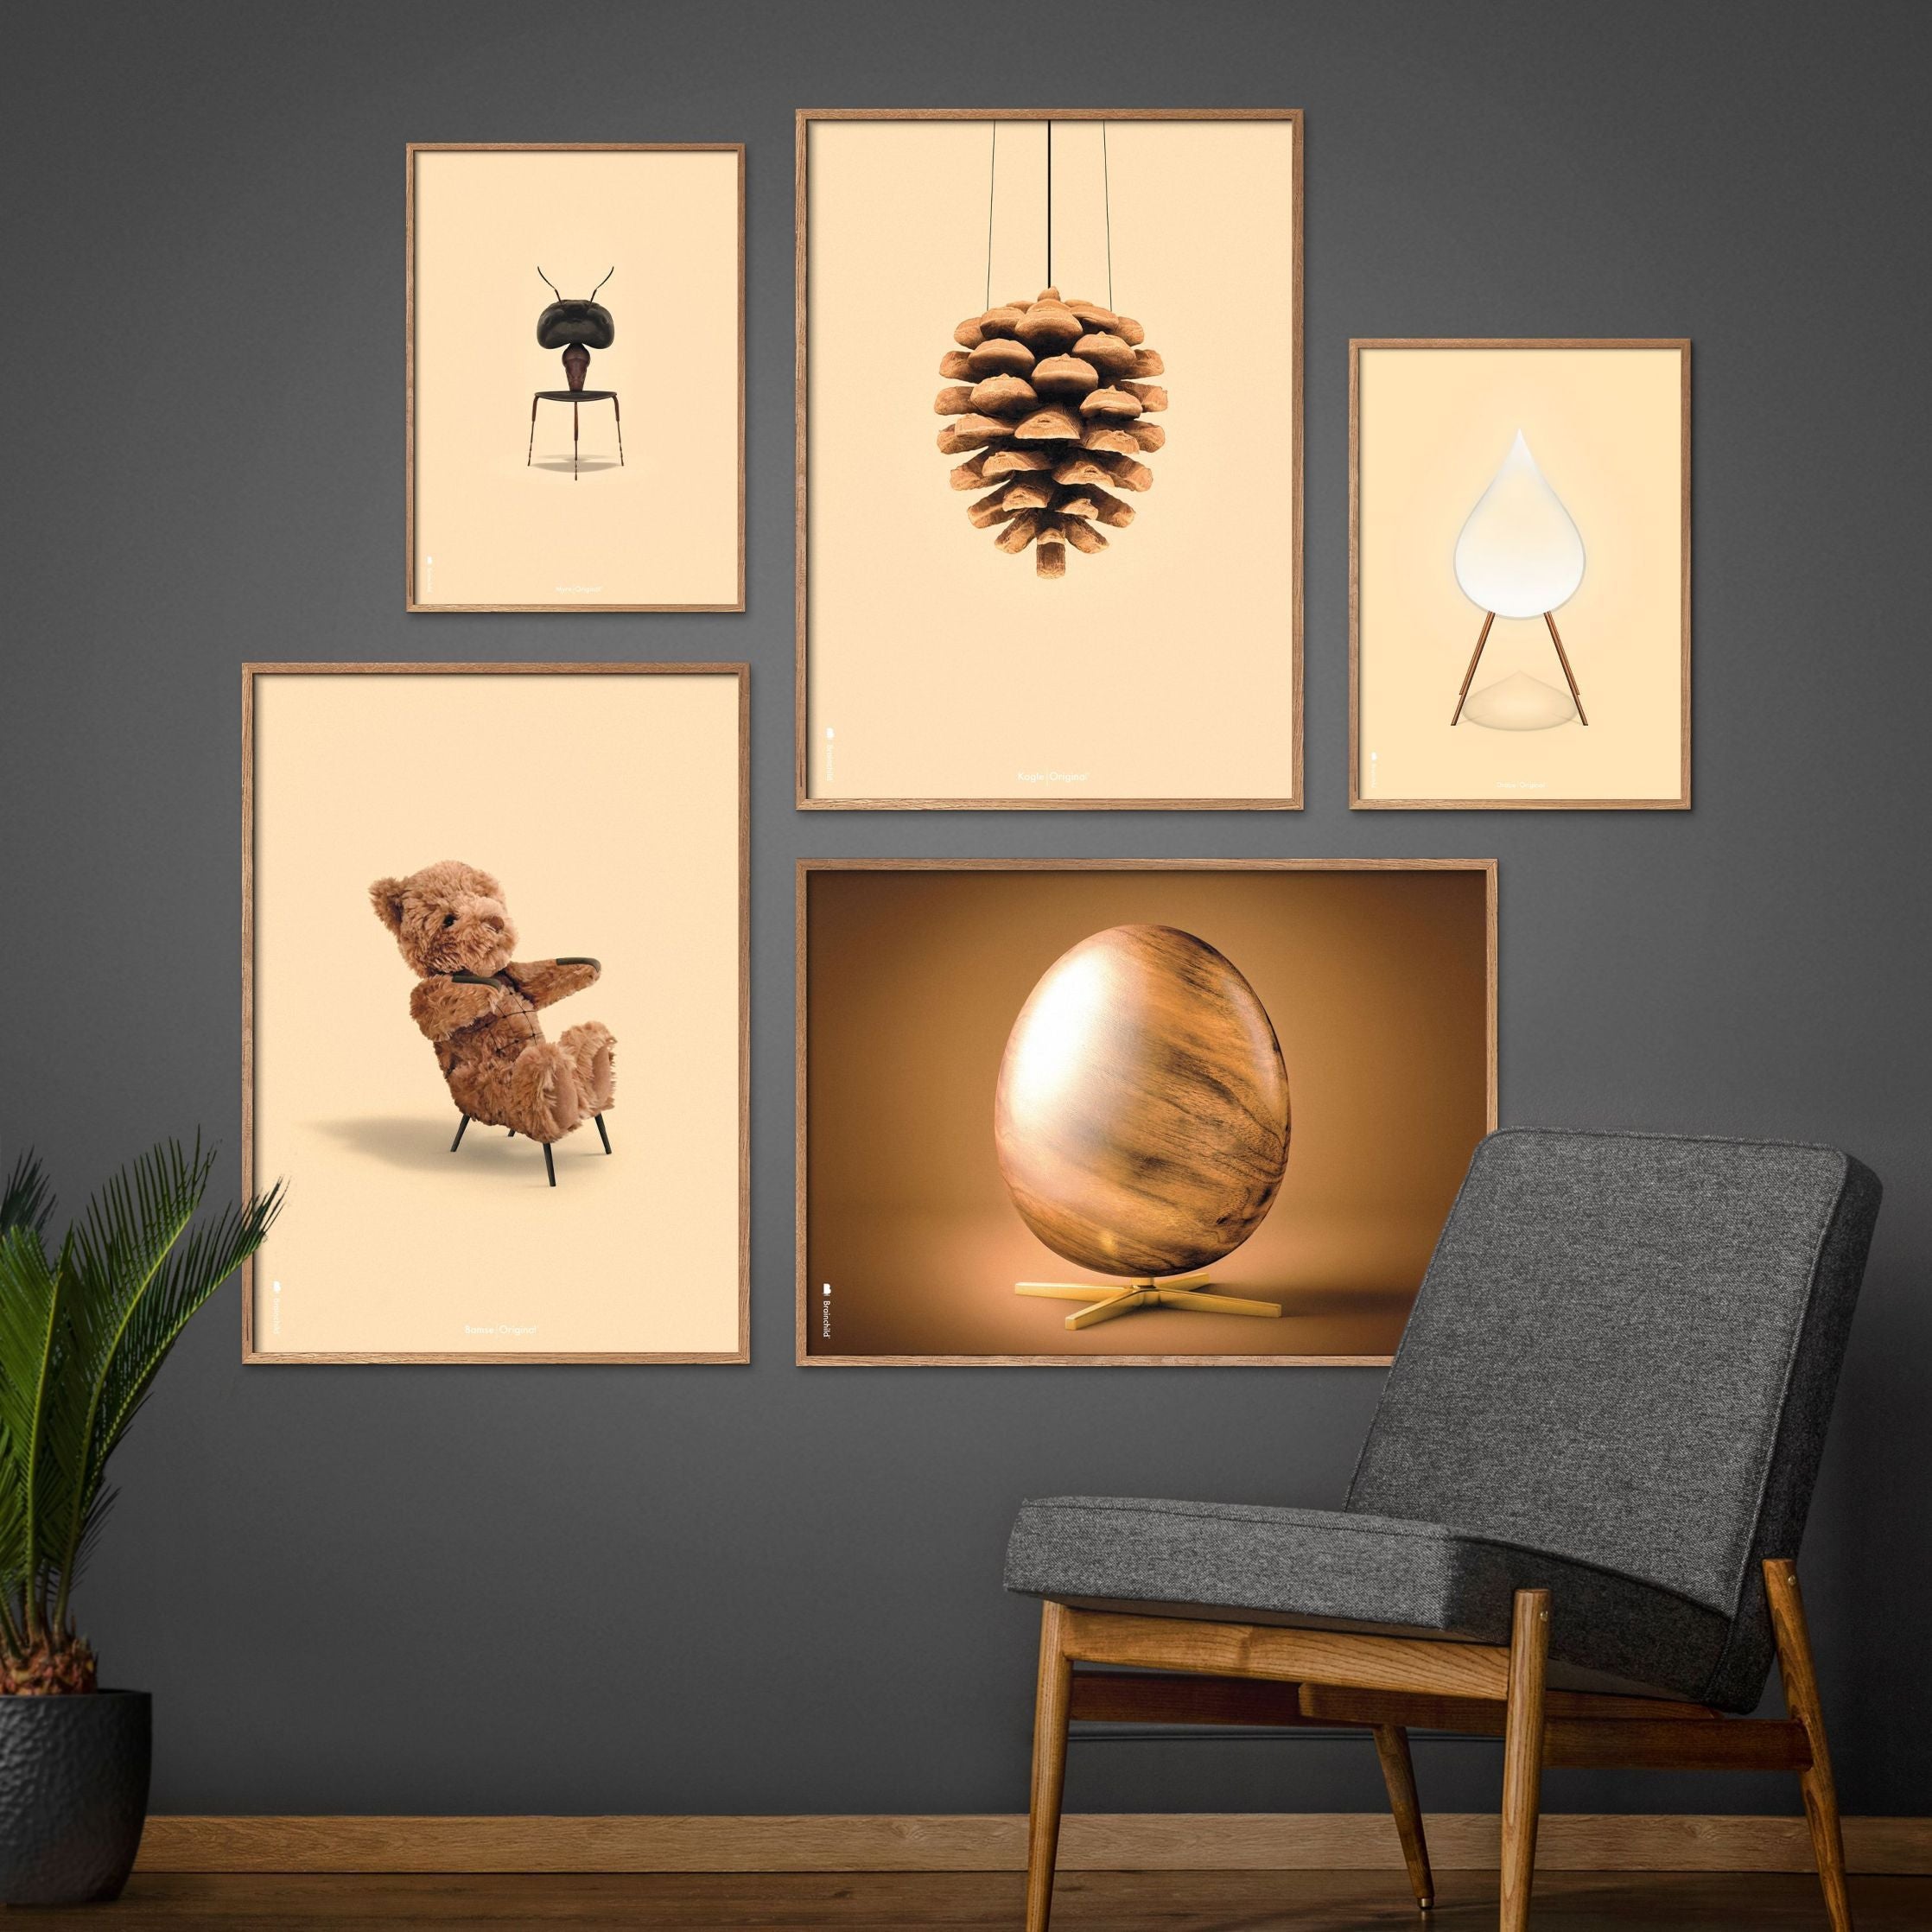 Brainchild Pine Cone Classic Poster, Frame Made Of Black Lacquered Wood 30x40 Cm, Sand Colored Background